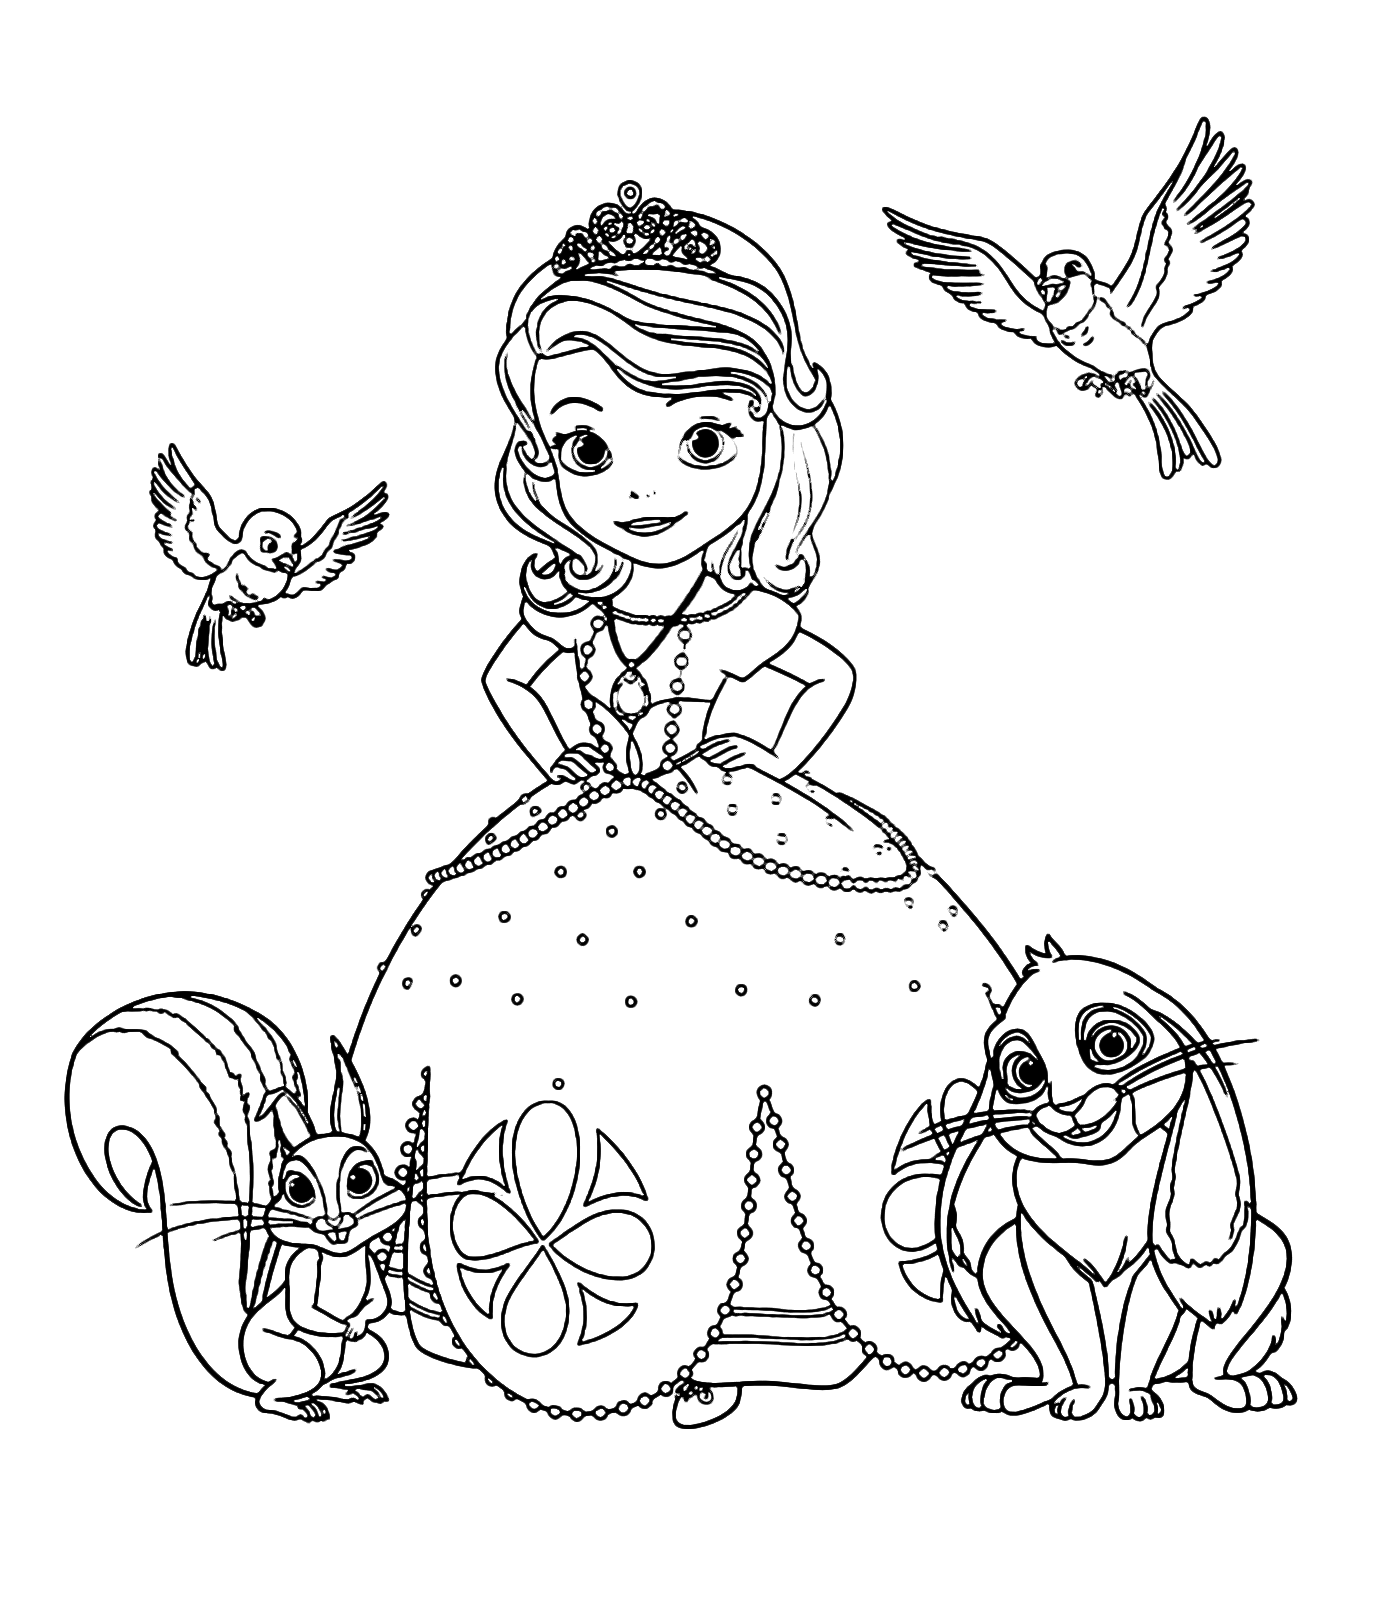 Sofia the First - Sofia with her friends Clover Whatnaught Mia and Robin